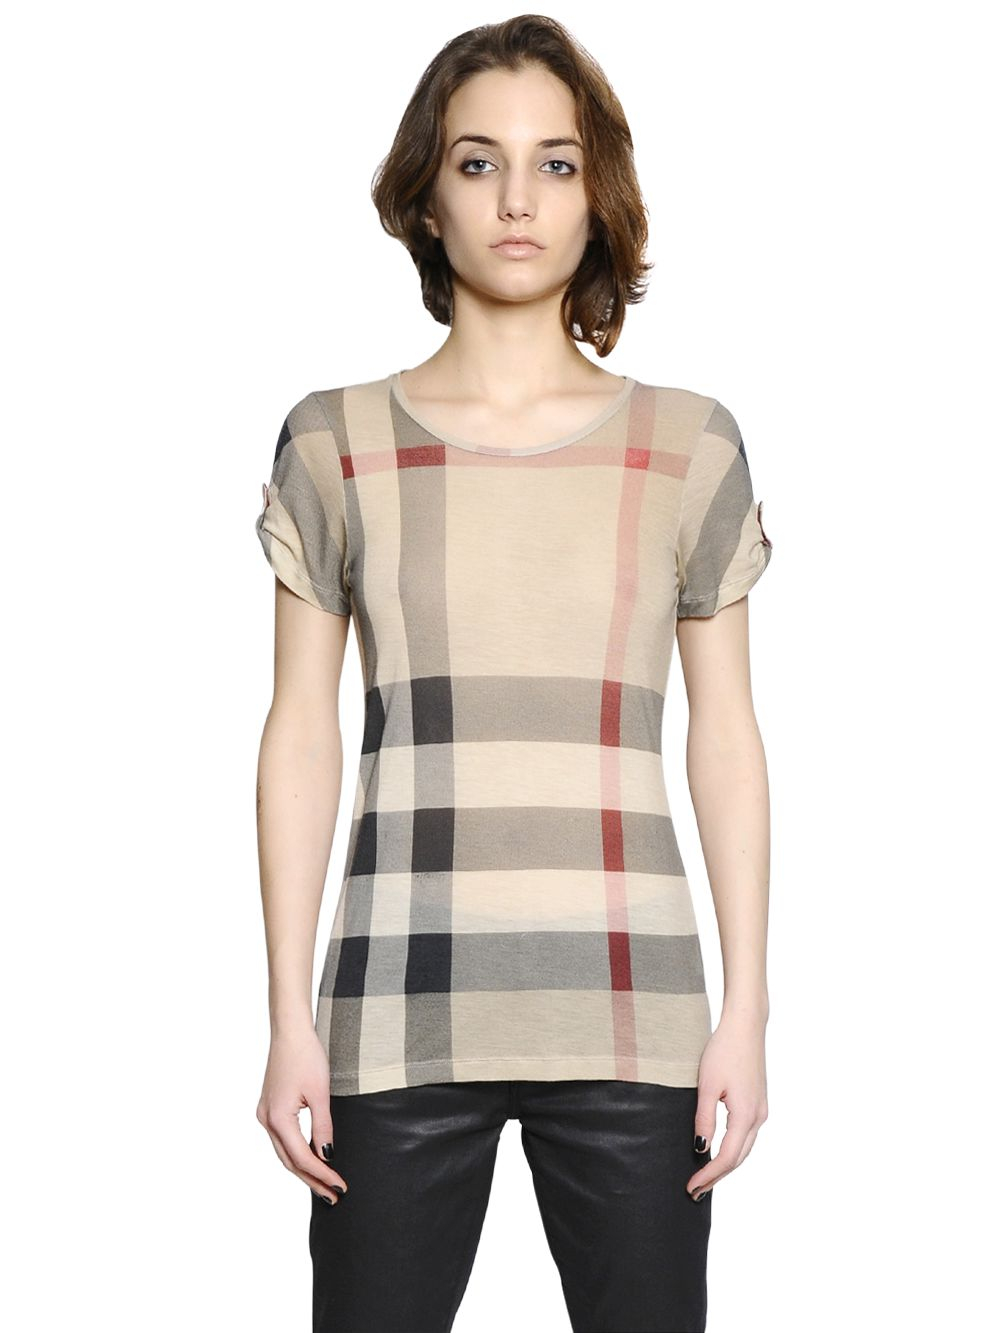 Burberry Brit Check Printed Modal T-Shirt in Beige (Natural) | Lyst